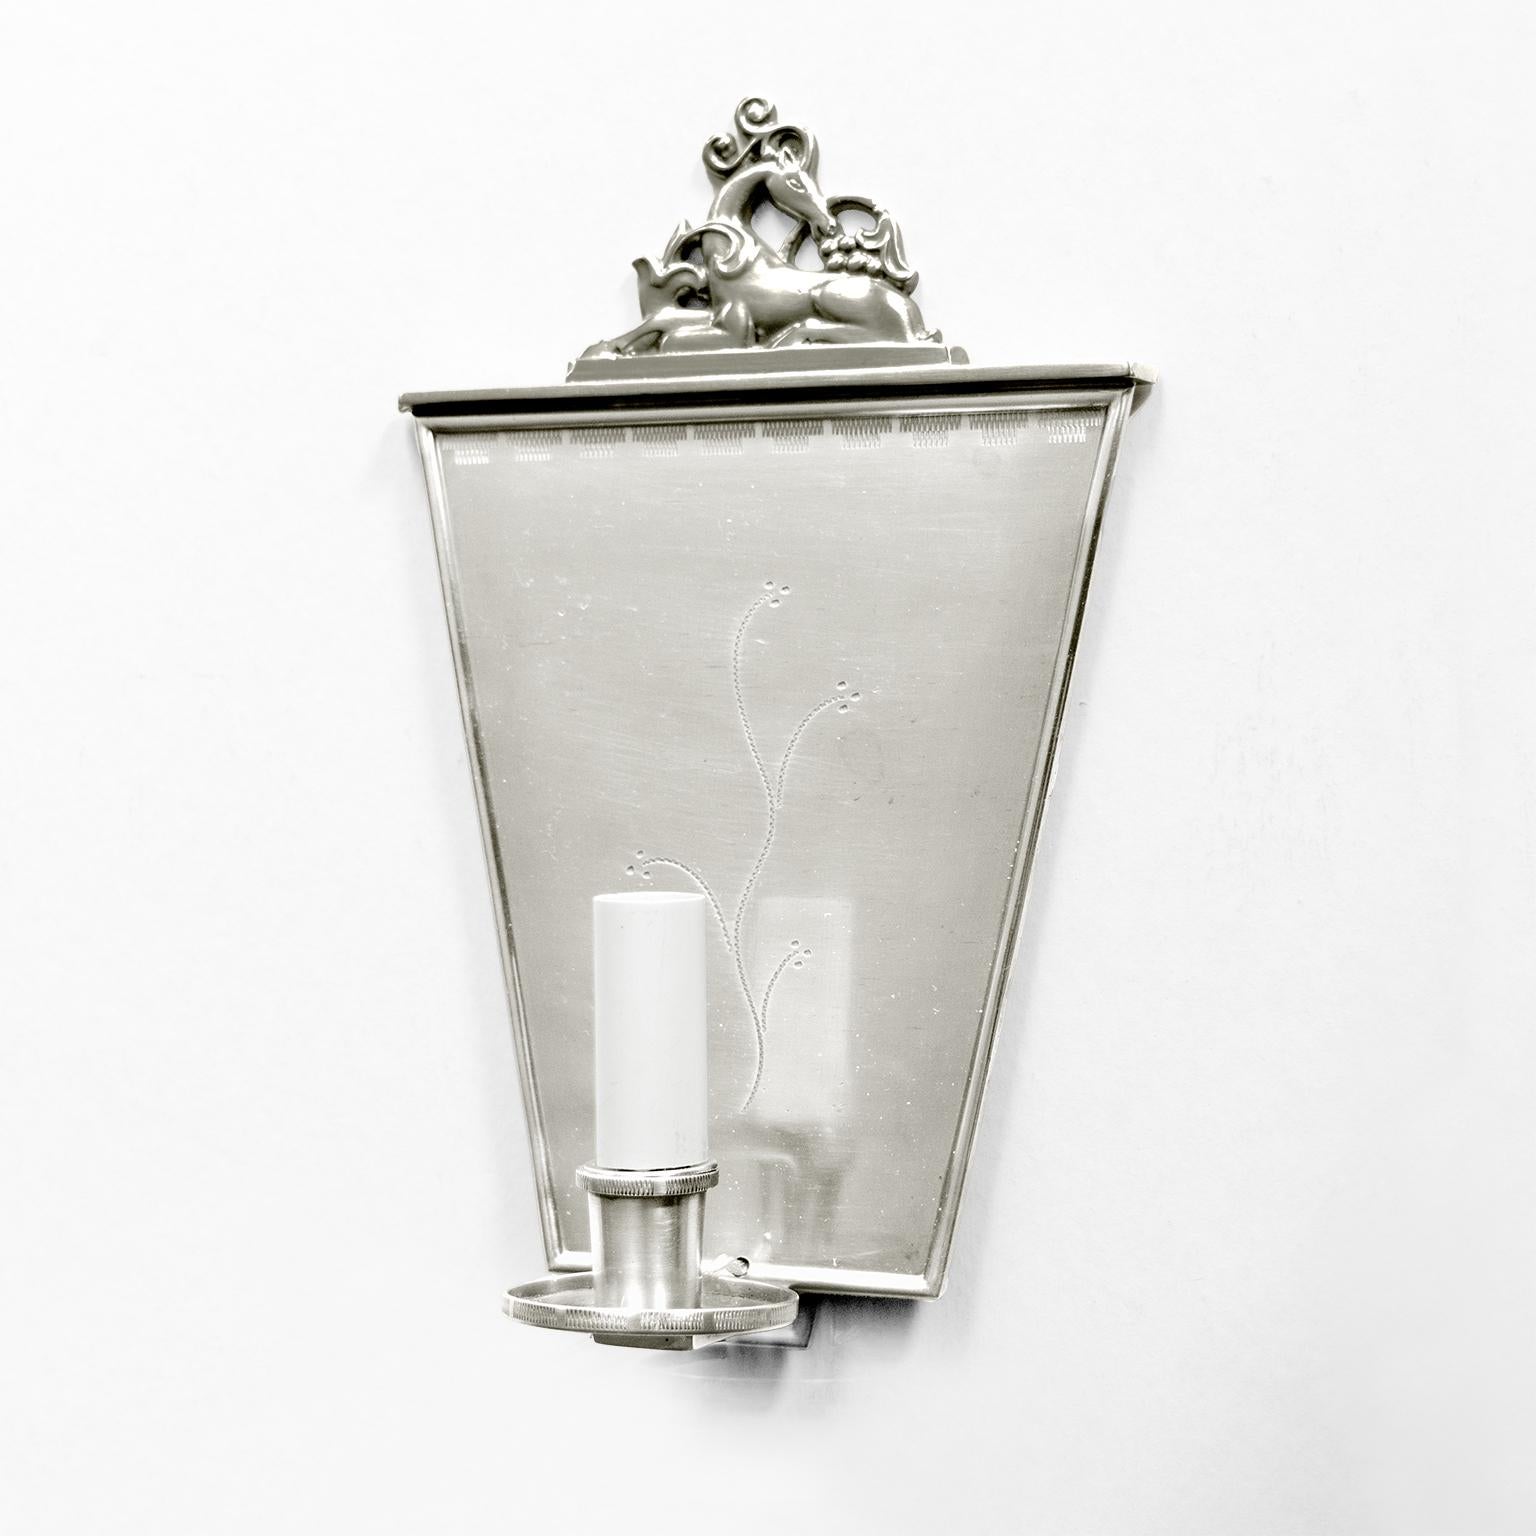 20th Century Pair of Swedish Grace polished Pewter Sconces by, C.G. Hallberg, Stockholm